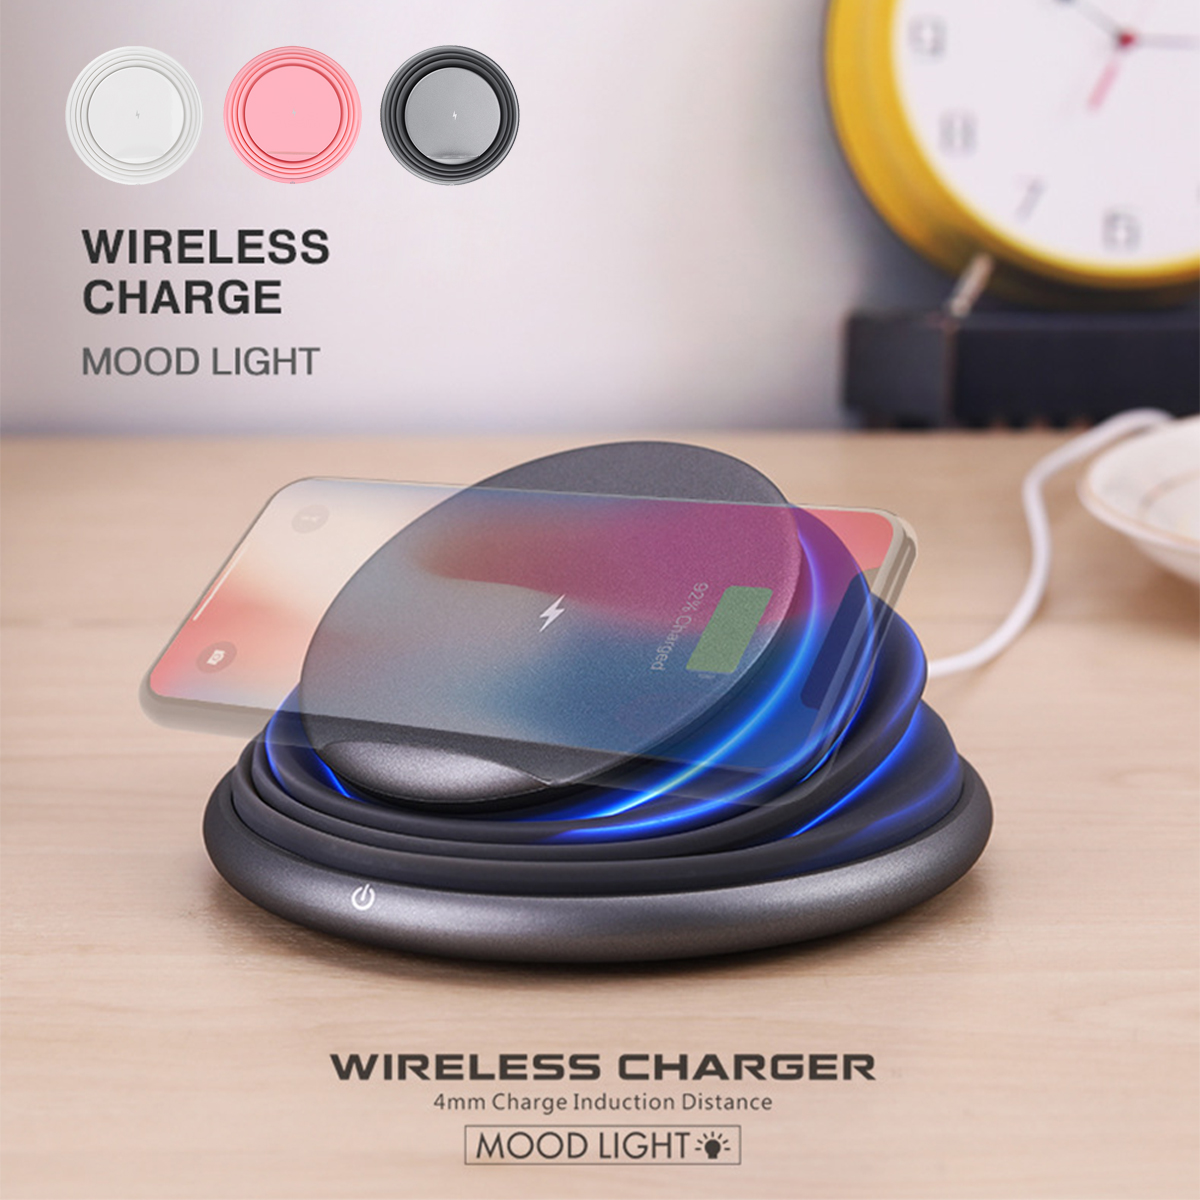 10W-9V-Wireless-Qi-Fast-Charger-Night-Light-Phone-Charging-Pad-For-Samsung-S8-S9-Note-8-1356503-4